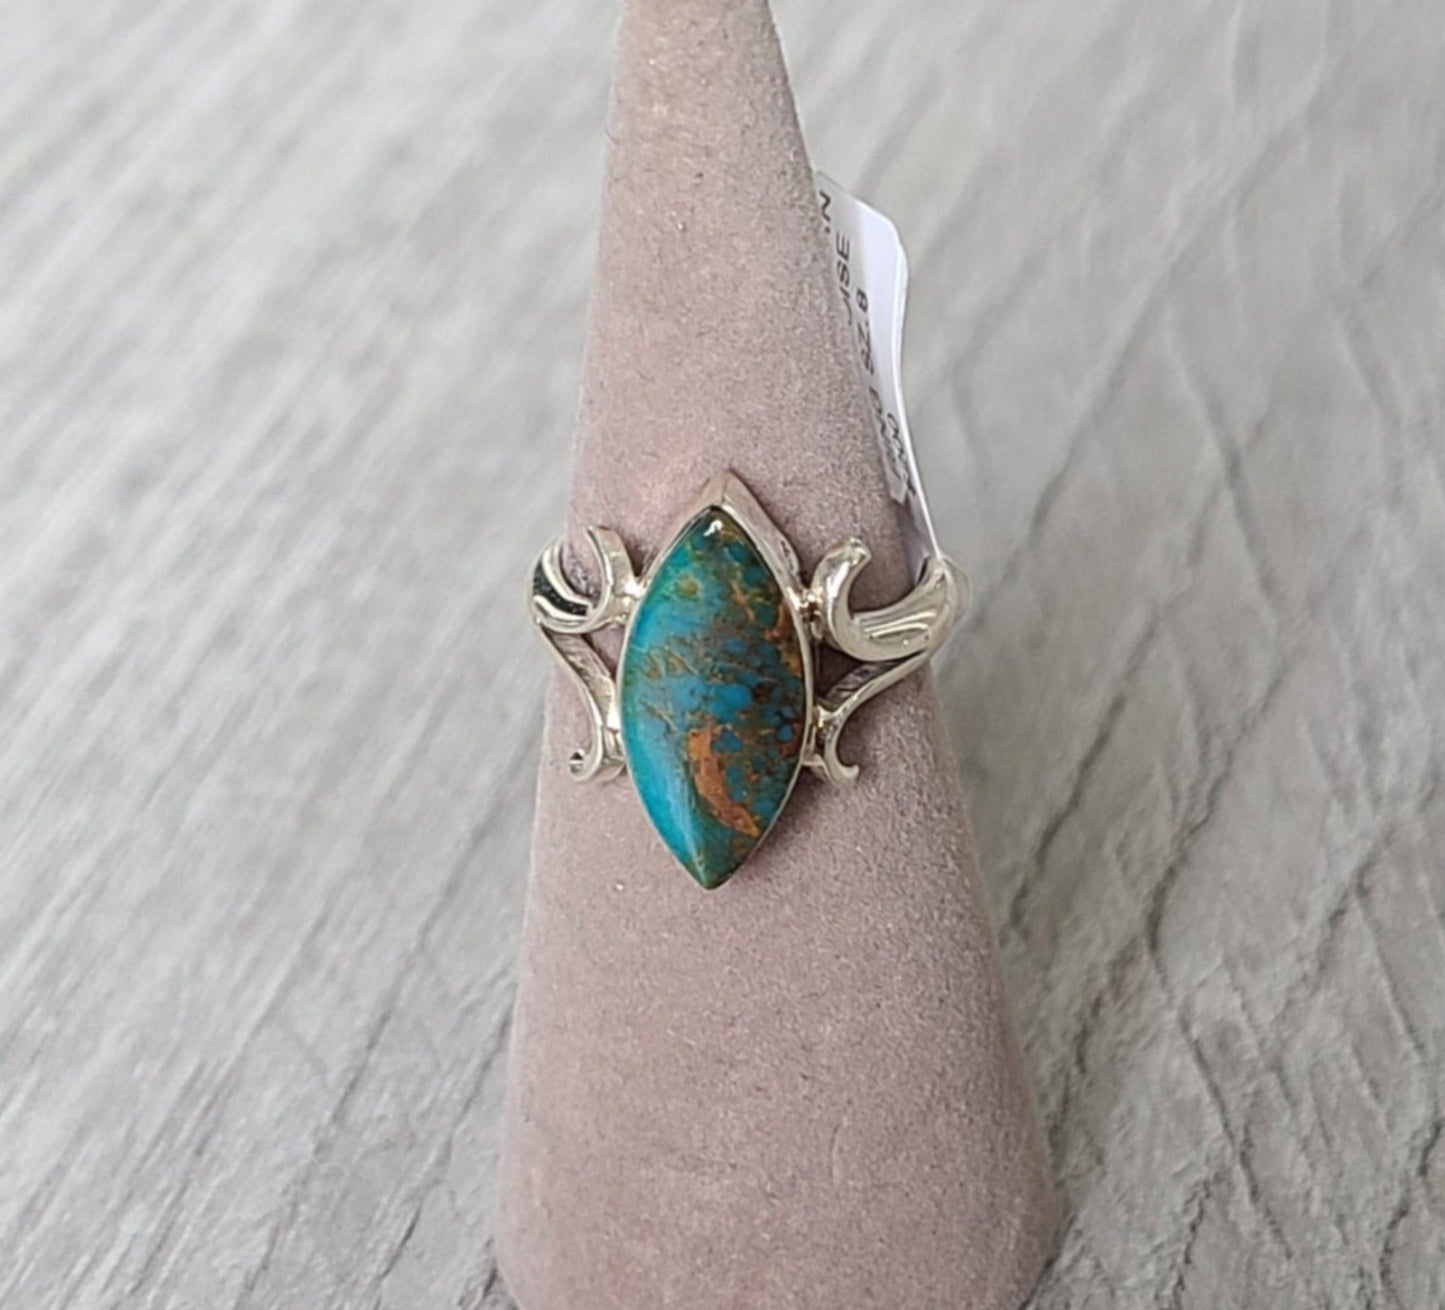 New! Beautiful color in this Kingman Turquoise. The stone is an elongated elliptical shape with pointed ends or "Marquise". Kingman turquoise comes from Arizona Bezel set with a split band and curved accents. Ring is size 8 Navajo artist, Larry Castilo Comes with Certificate of Authenticity as shown. MSRP: $200